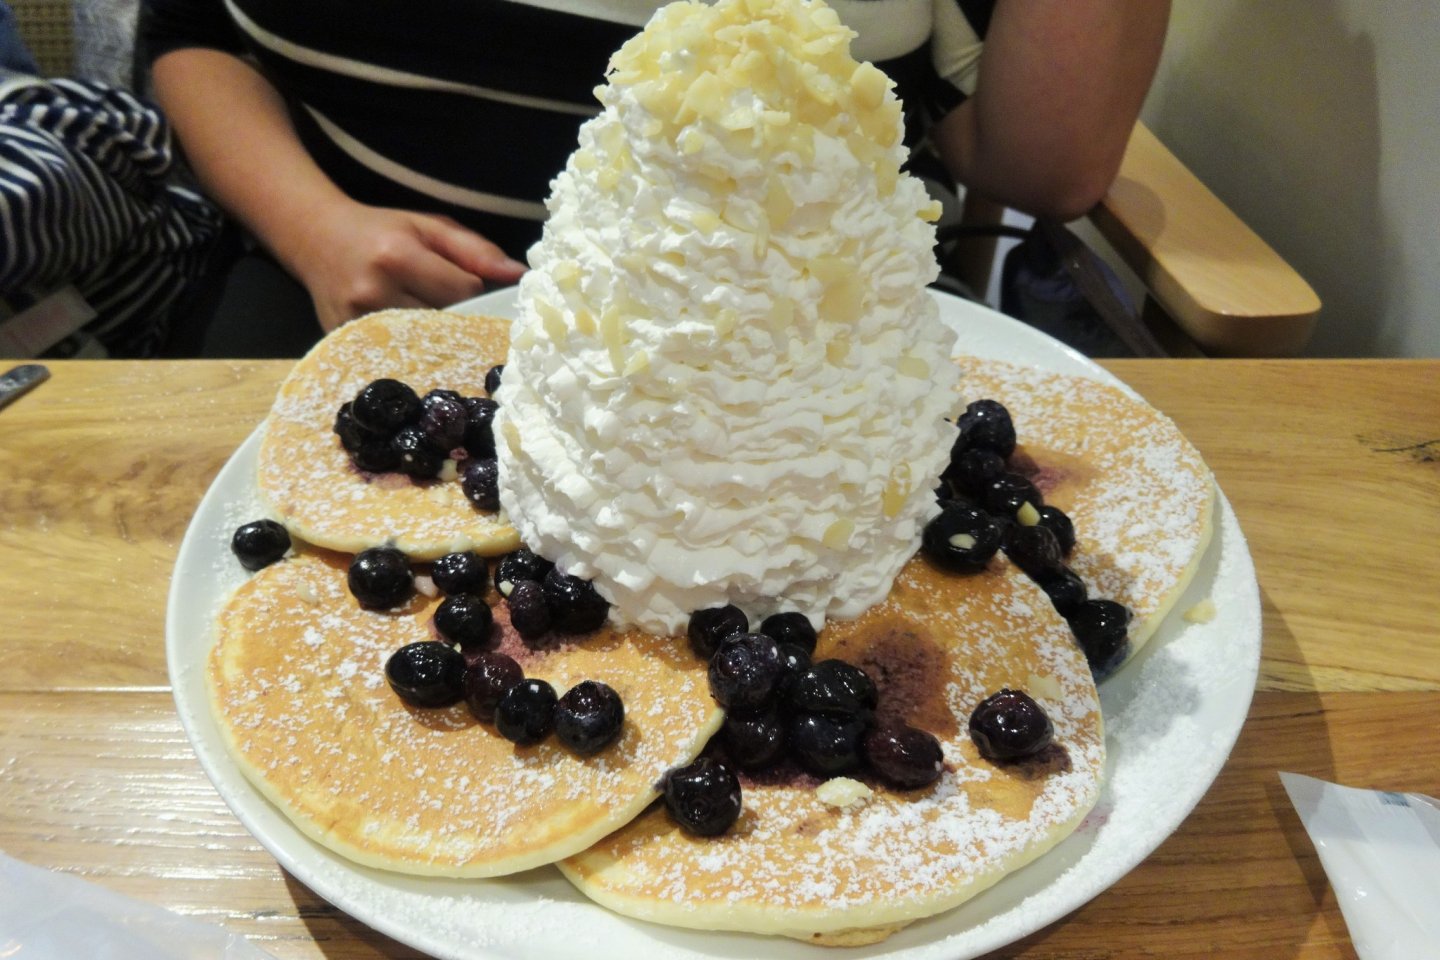 Blueberry pancakes piled high with whipped cream